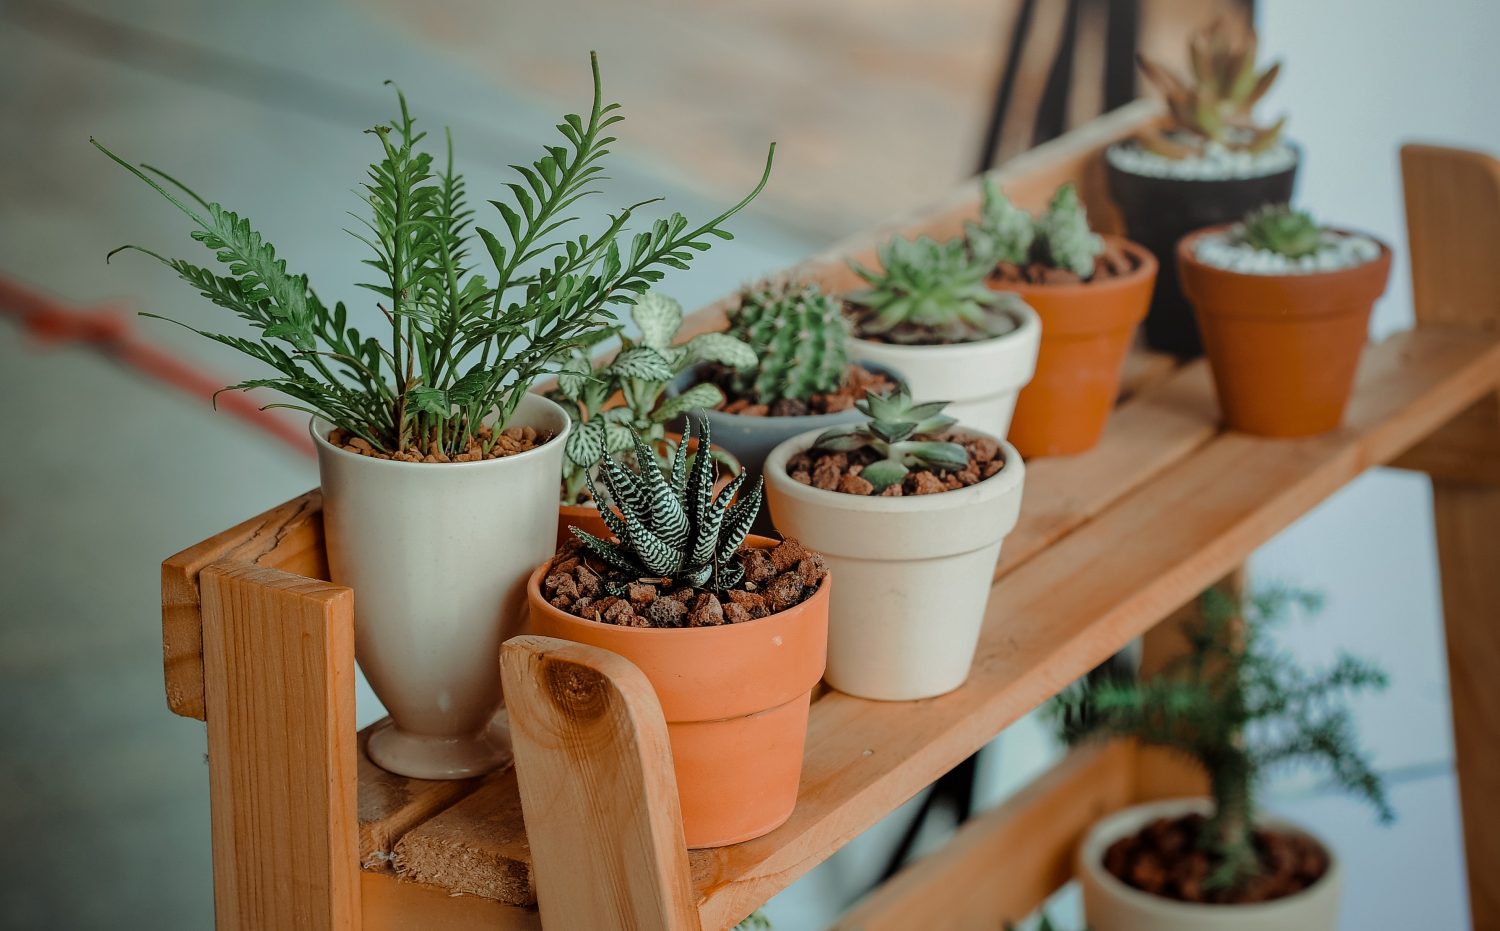 Tips to keep in mind when moving houseplants